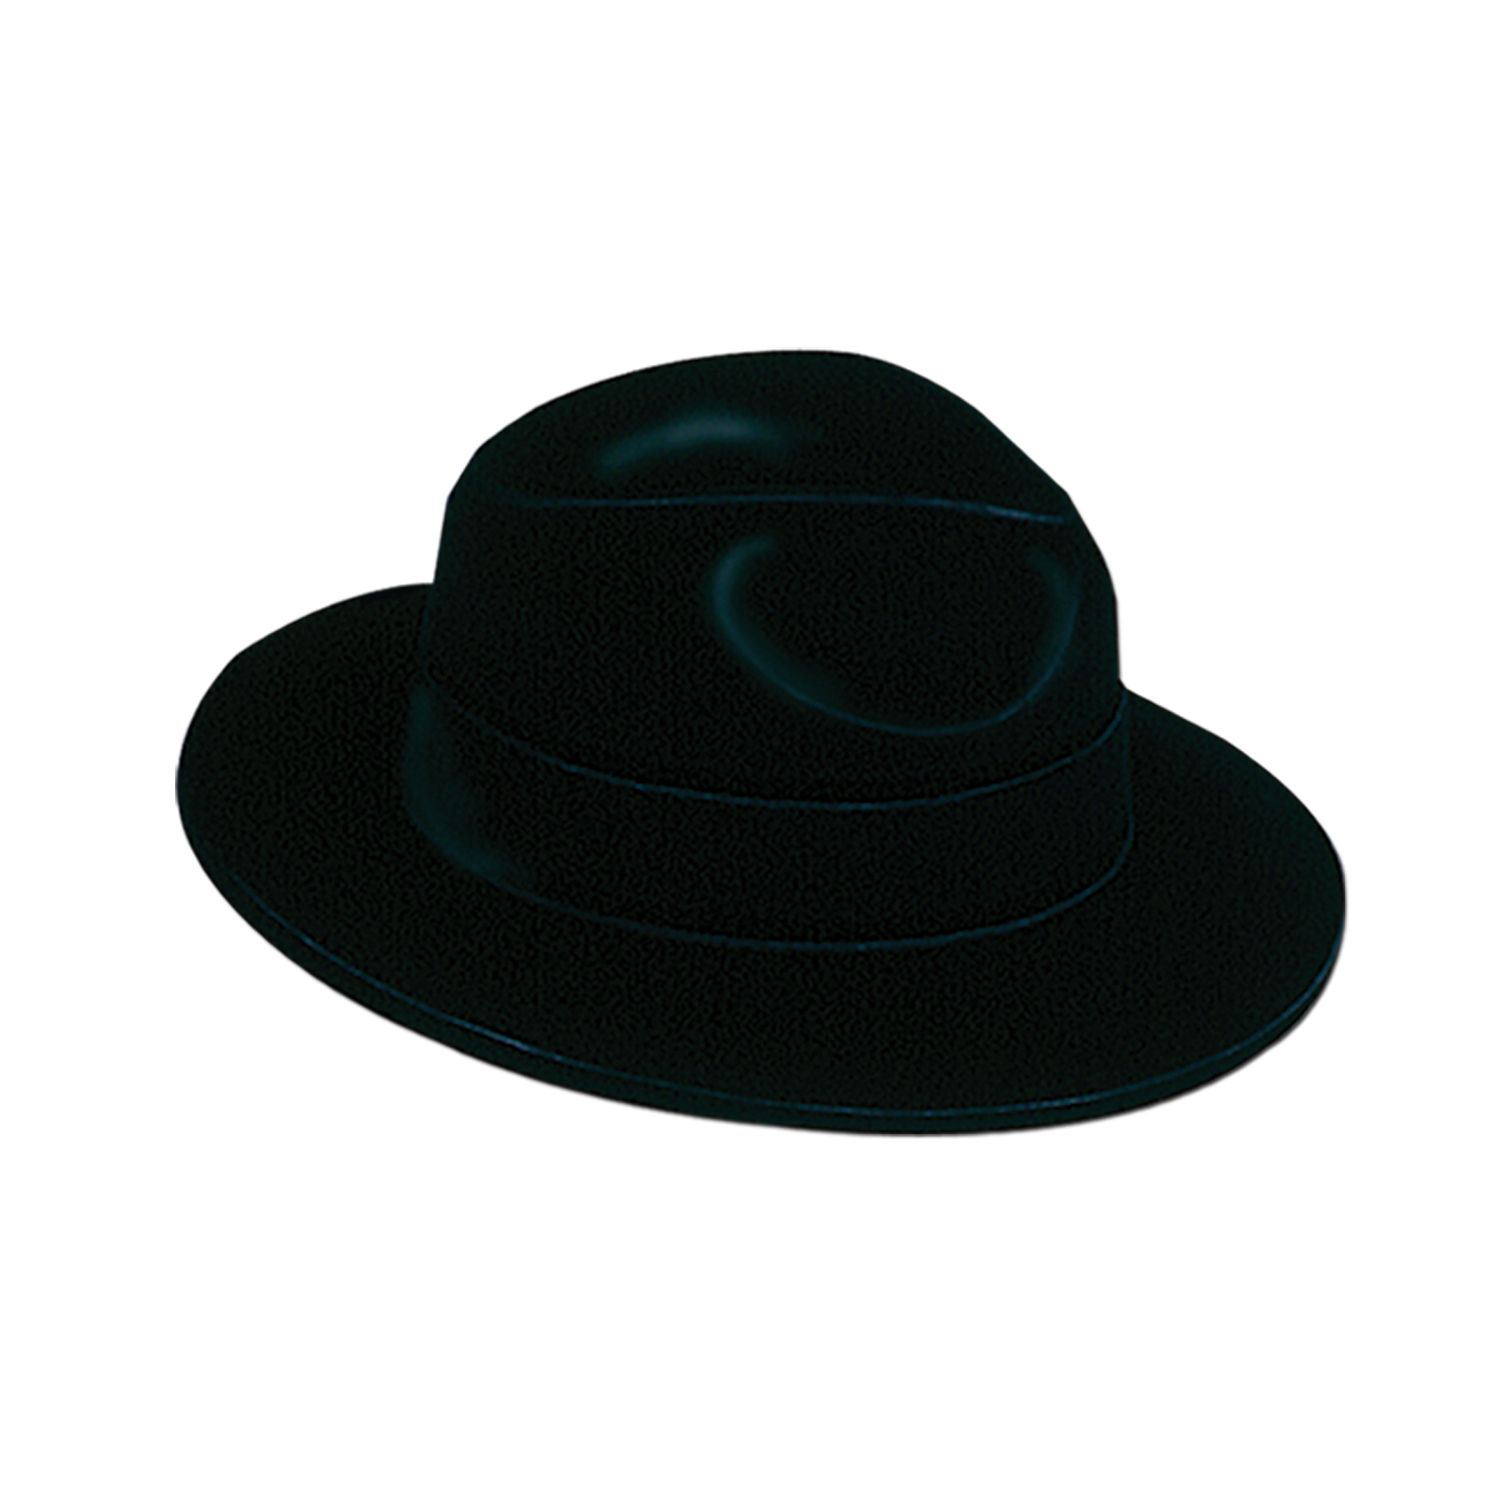 Velour fedora made of plastic material and velour coating.